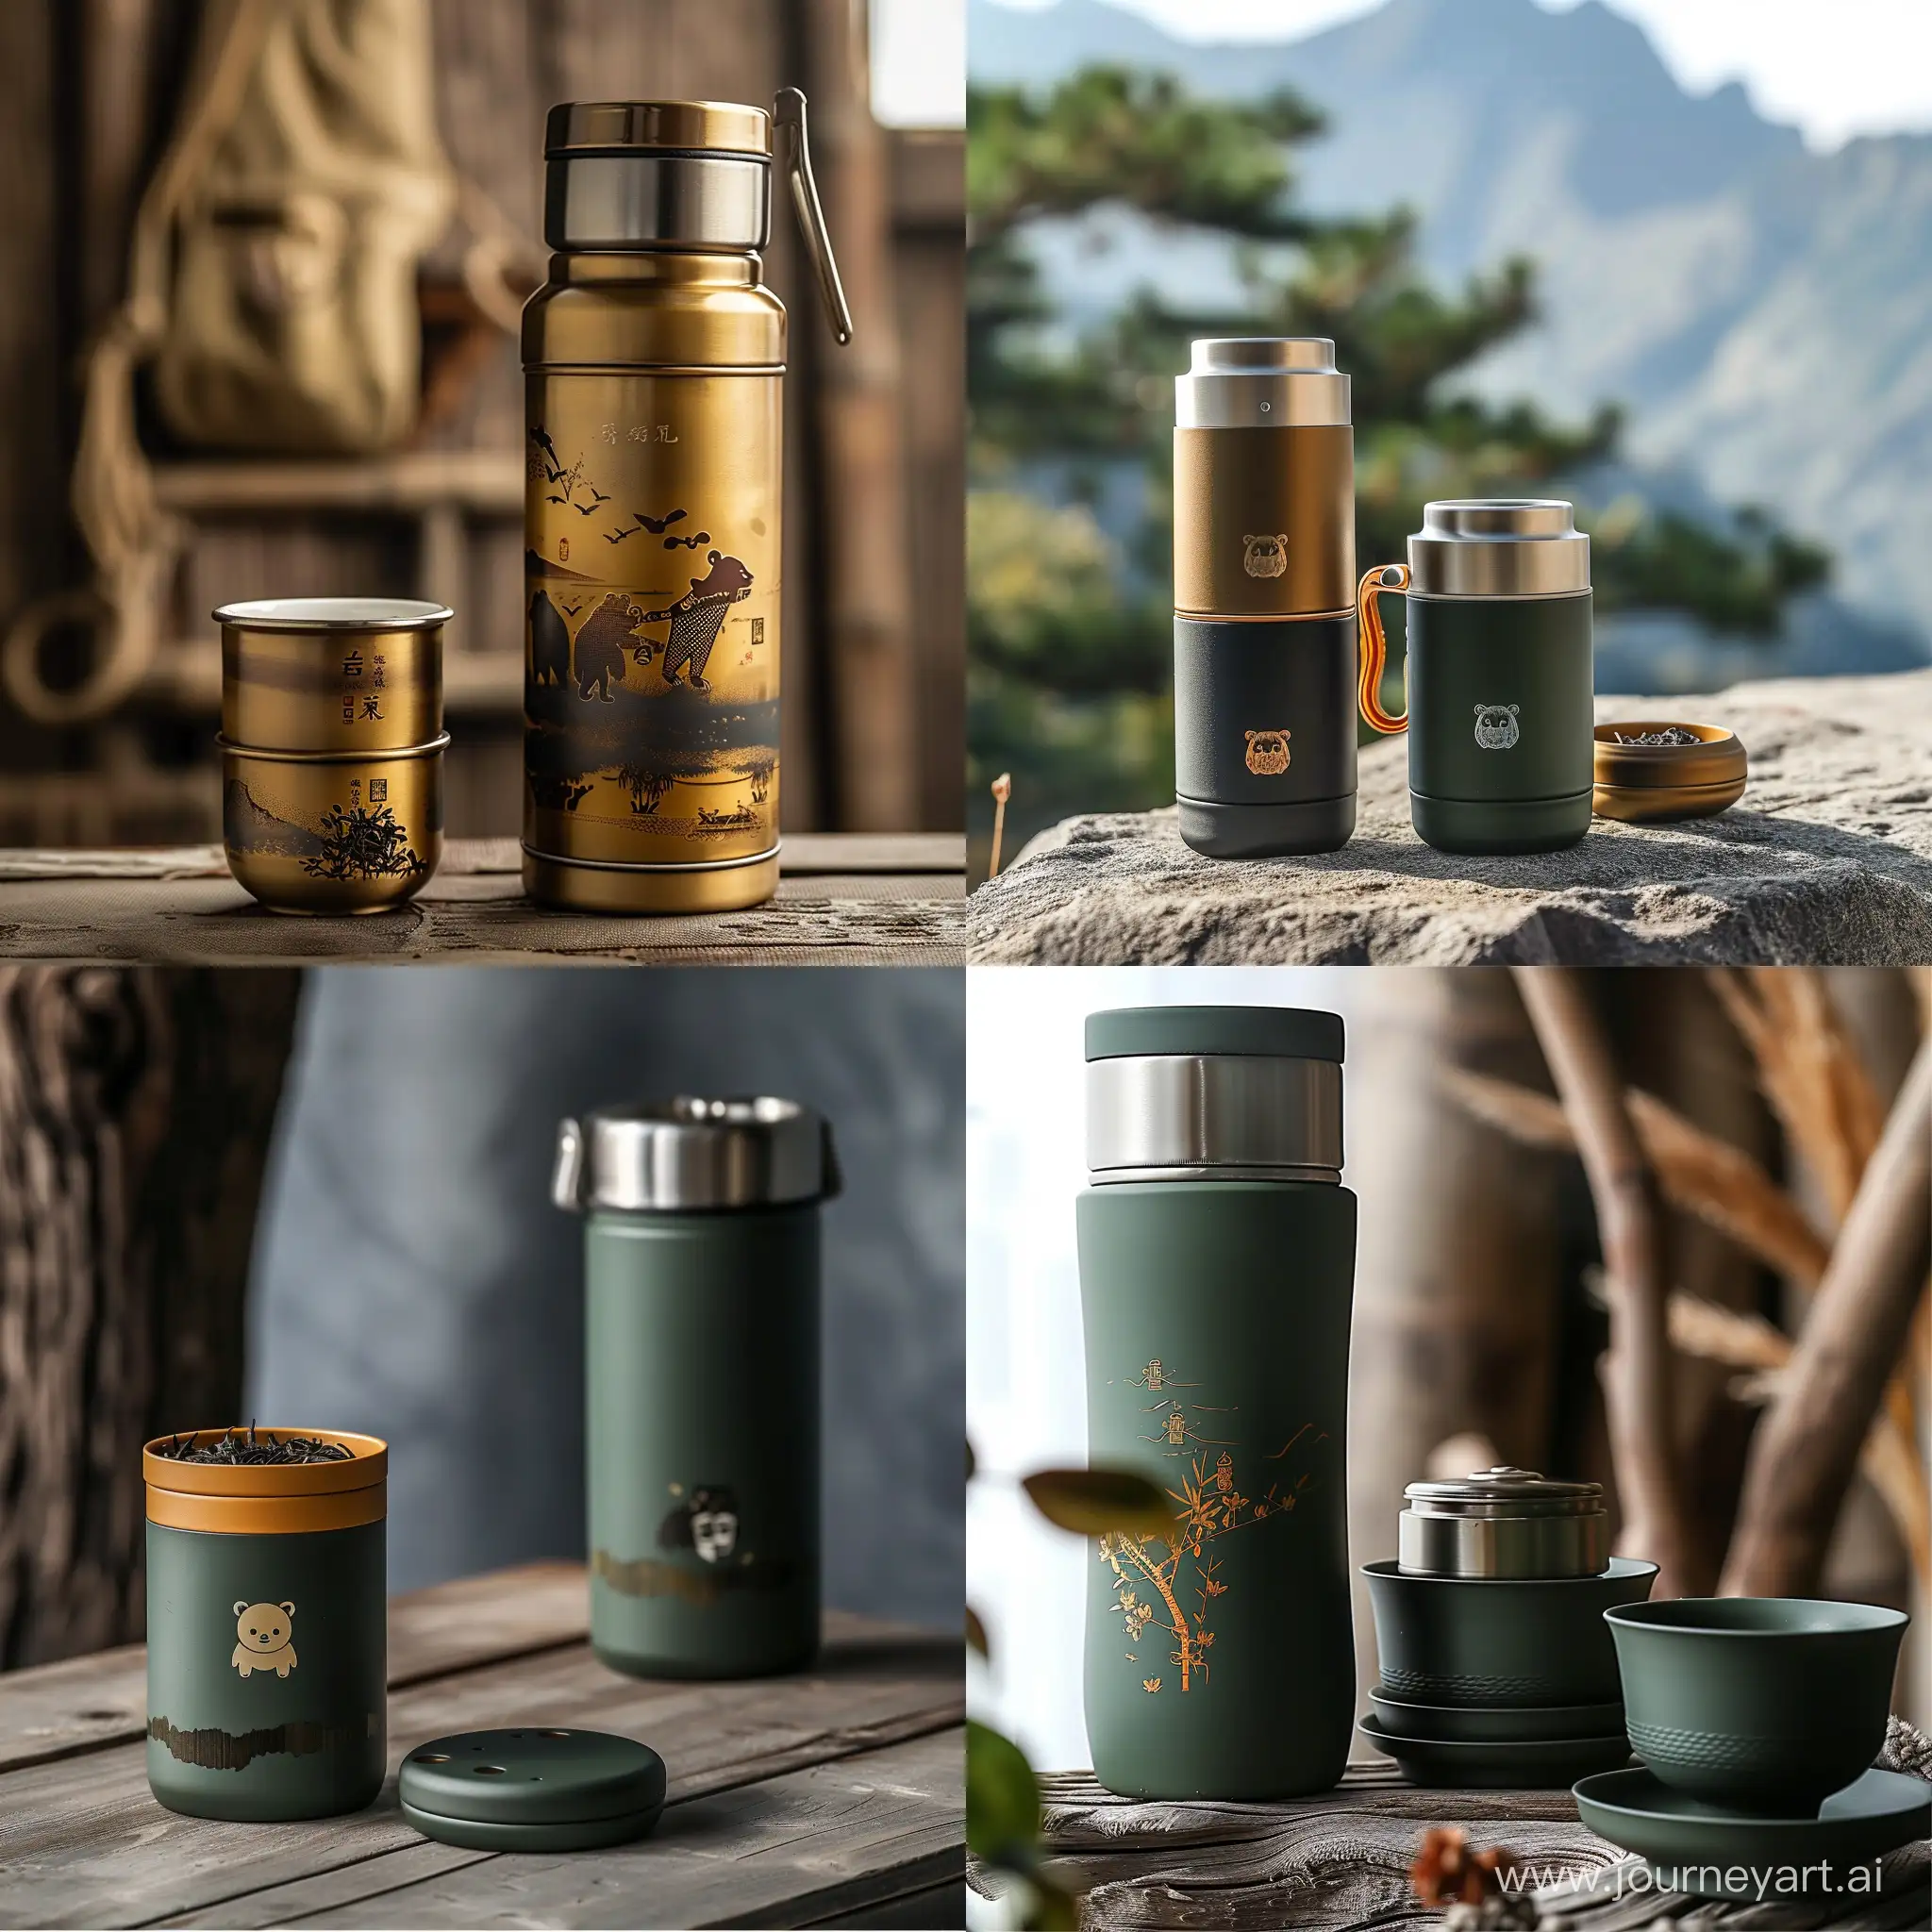 Dimensions is Height approximately 15cm, Diameter around 8cm, Travel thermos flask and tea cup material will made of Stainless steel and PP plastic lid,Travel thermos flask and cups should be stackable for storage, possibly from the bottom or top, Include a special compartment for storing tea leaves, Implement a camping-style folding handle design, Incorporate the theme of the Taiwanese black bear into the design, particularly on the cup lid